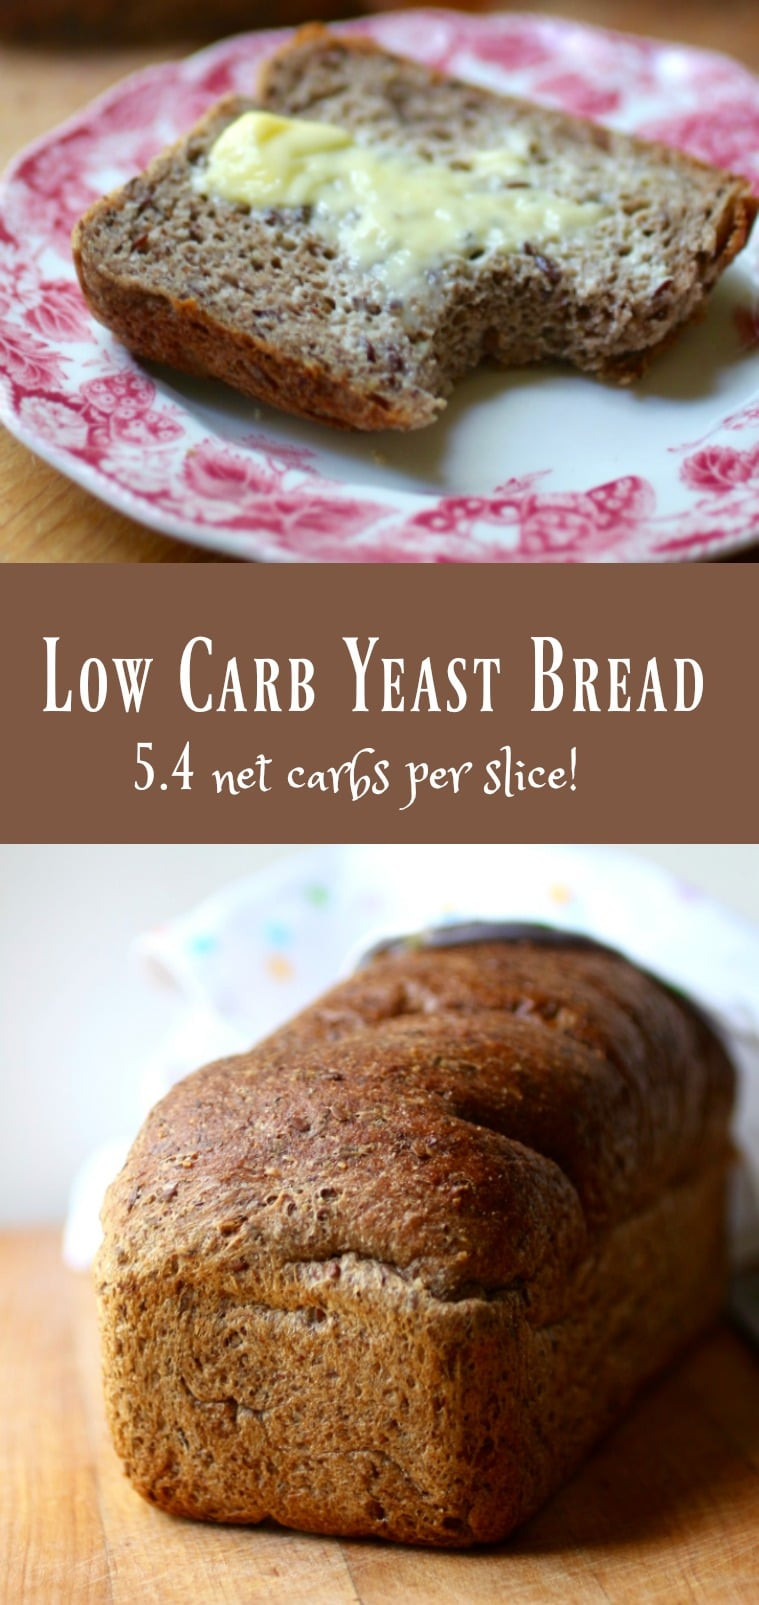 Keto Low Carb Bread
 Low Carb Yeast Bread Keto Sandwich Bread lowcarb ology